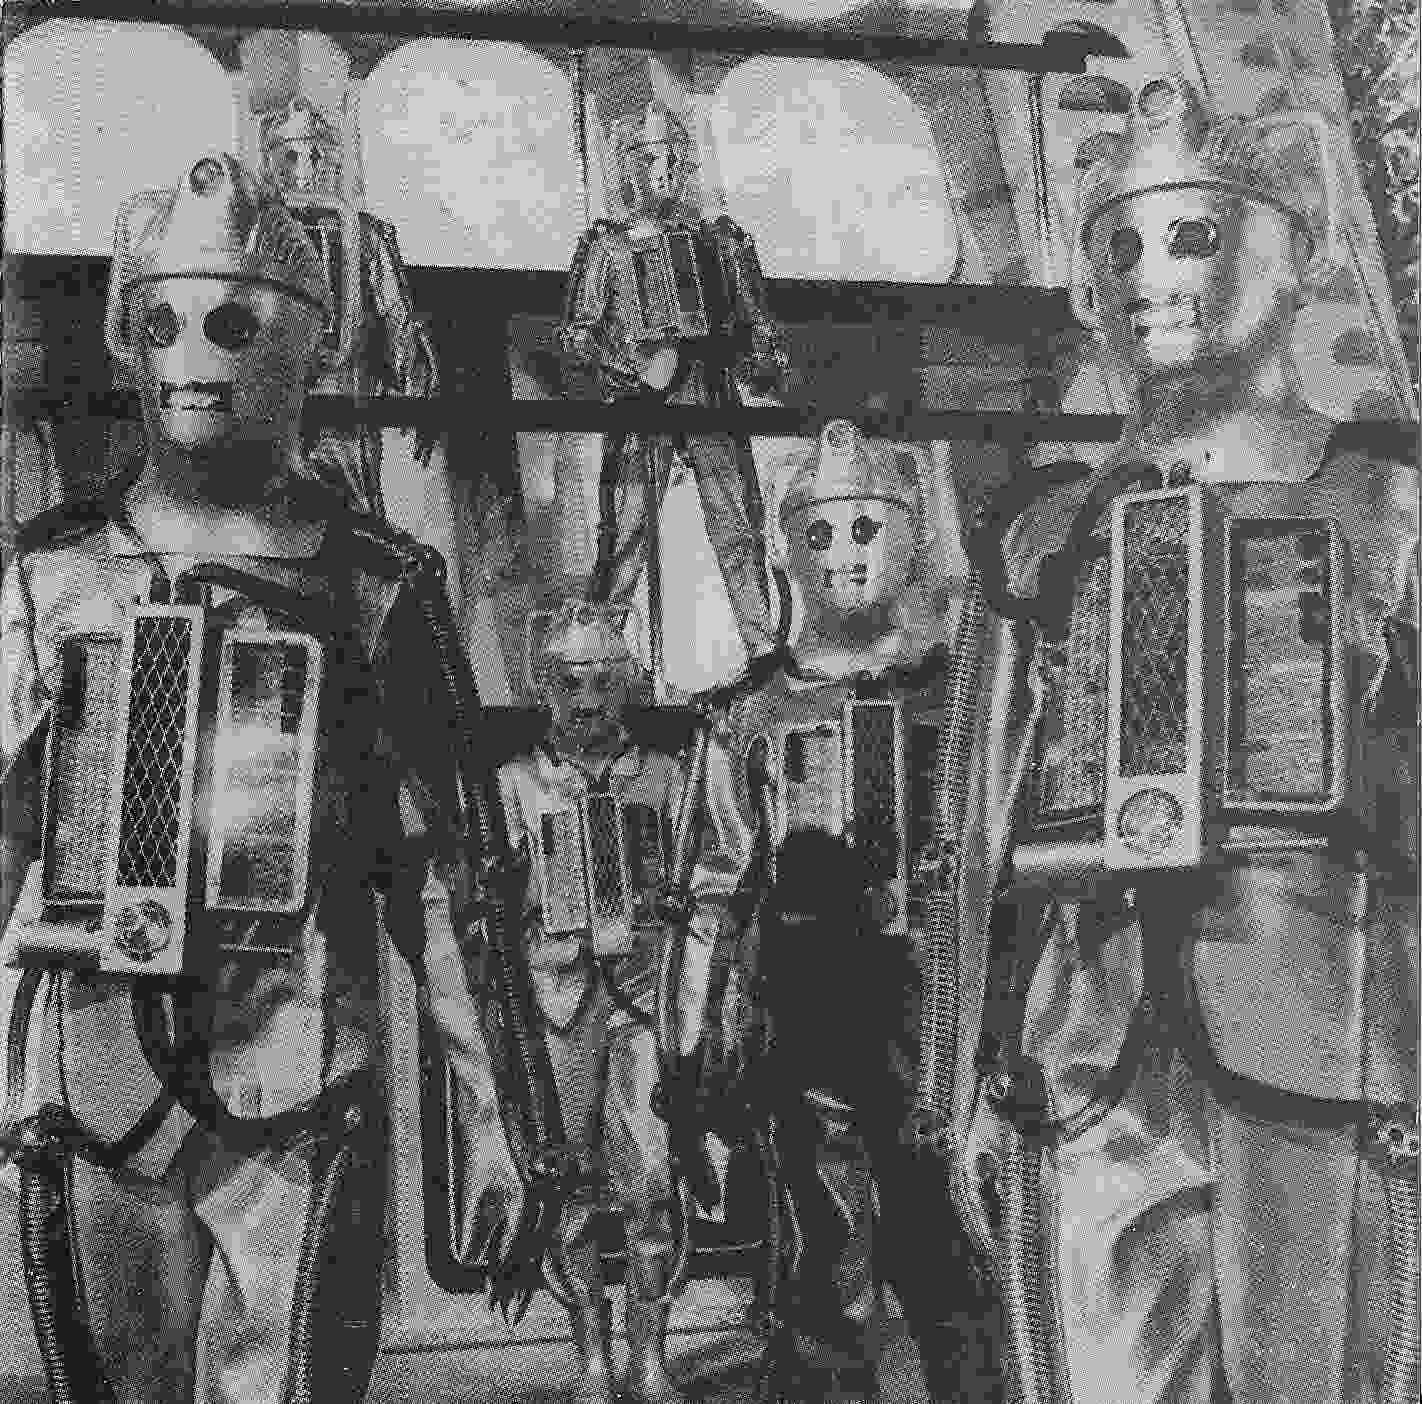 Picture of V-SAT 3967 Music from the tomb of the Cybermen by artist Ron Grainer and the BBC Radiophonic Workshop / Dick Mills from the BBC cds - Records and Tapes library